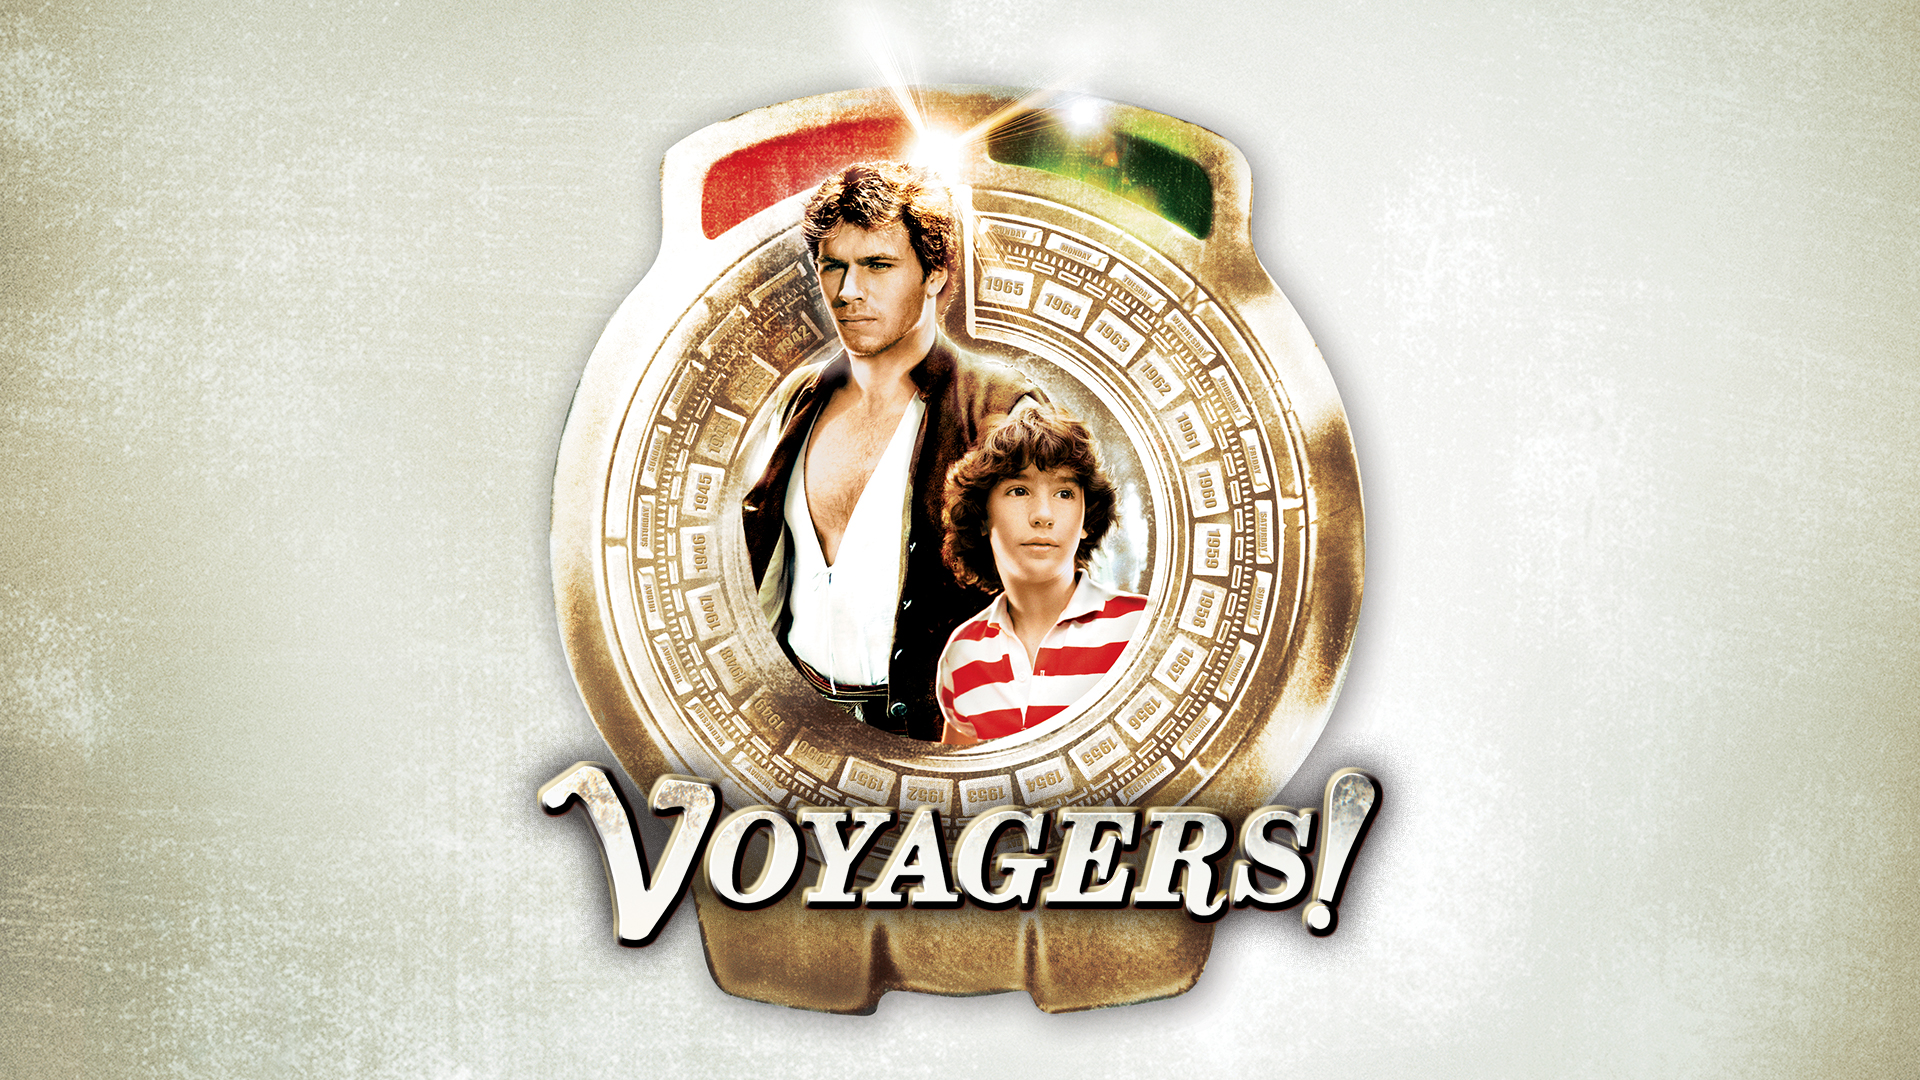 what is the tv show voyagers about